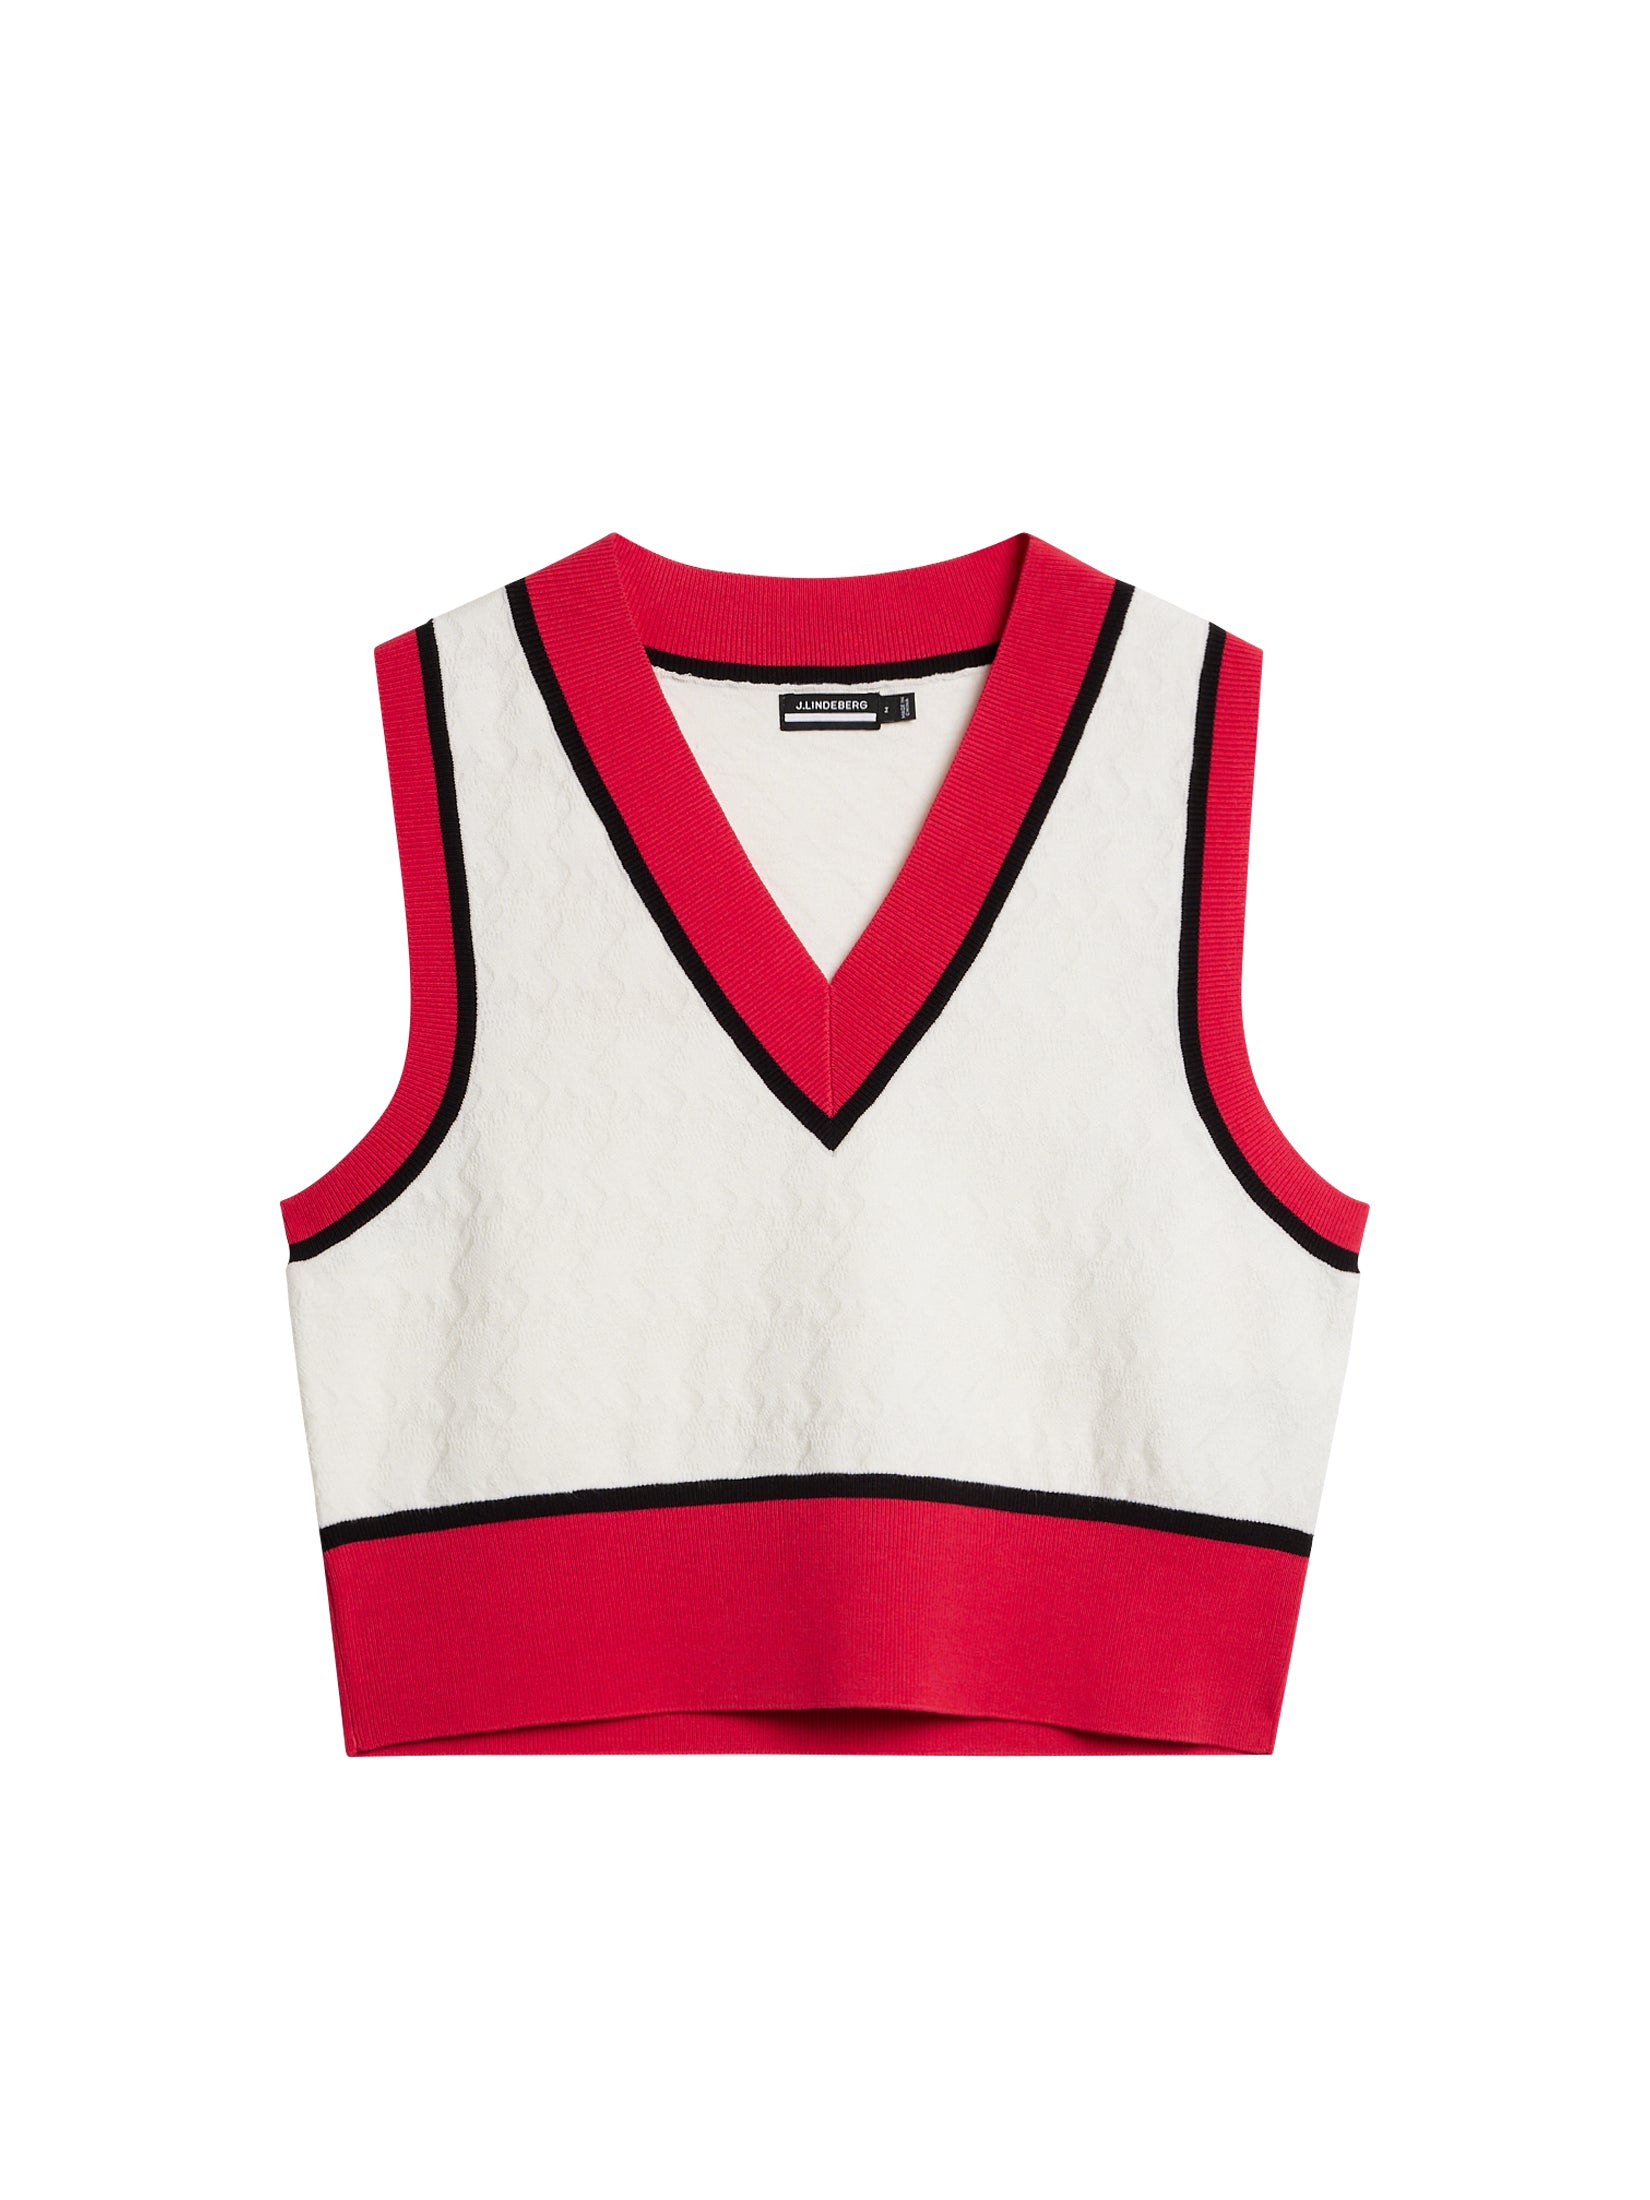 Barbados Knitted Vest